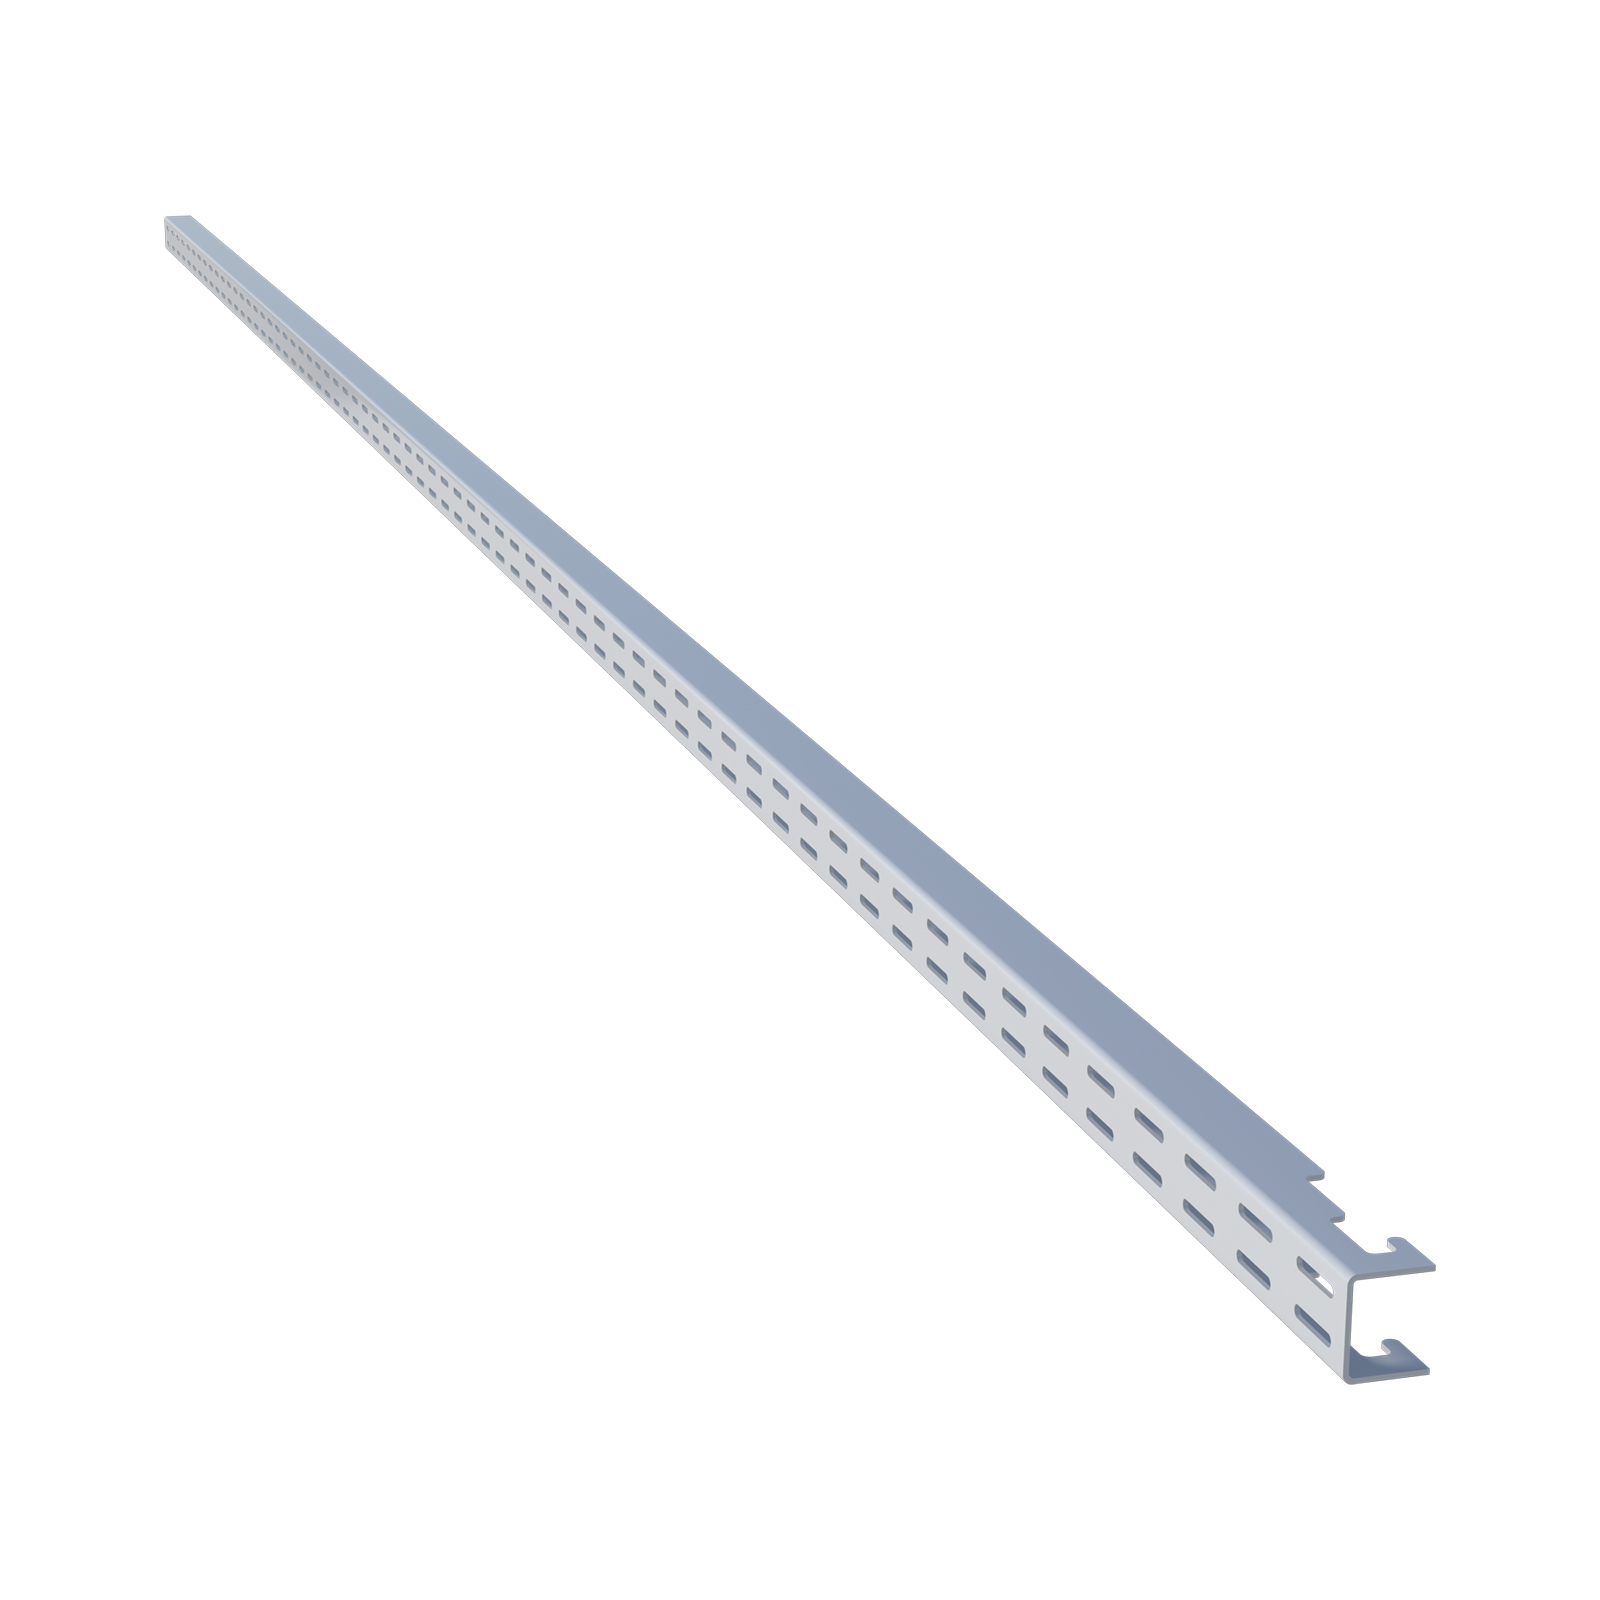 Home Solutions Double Slot Wall Strip White 2133mm